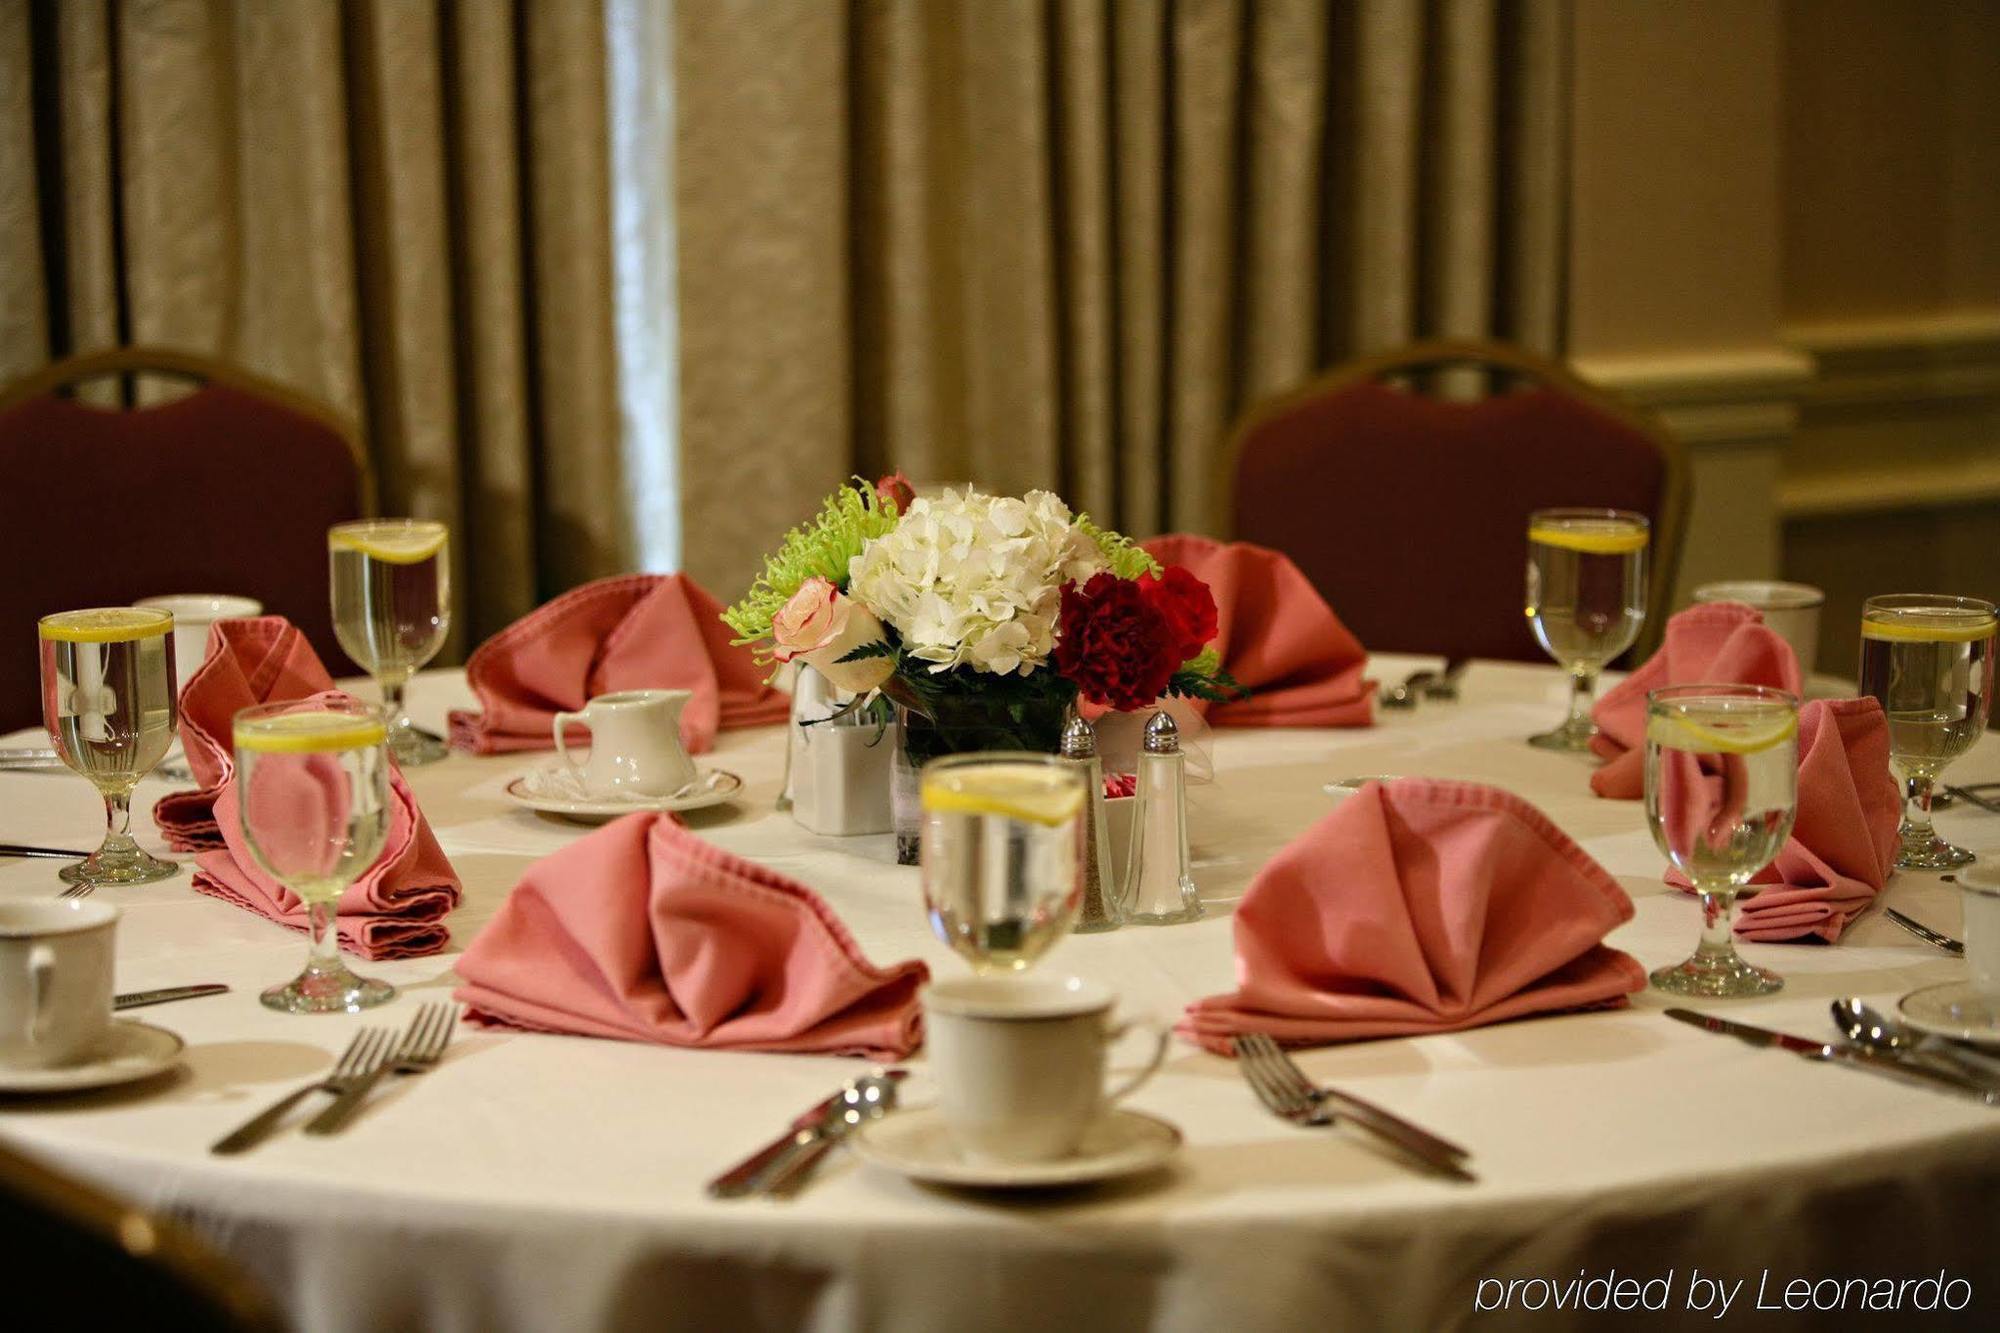 Radisson Hotel And Suites Chelmsford-Lowell Restaurant foto